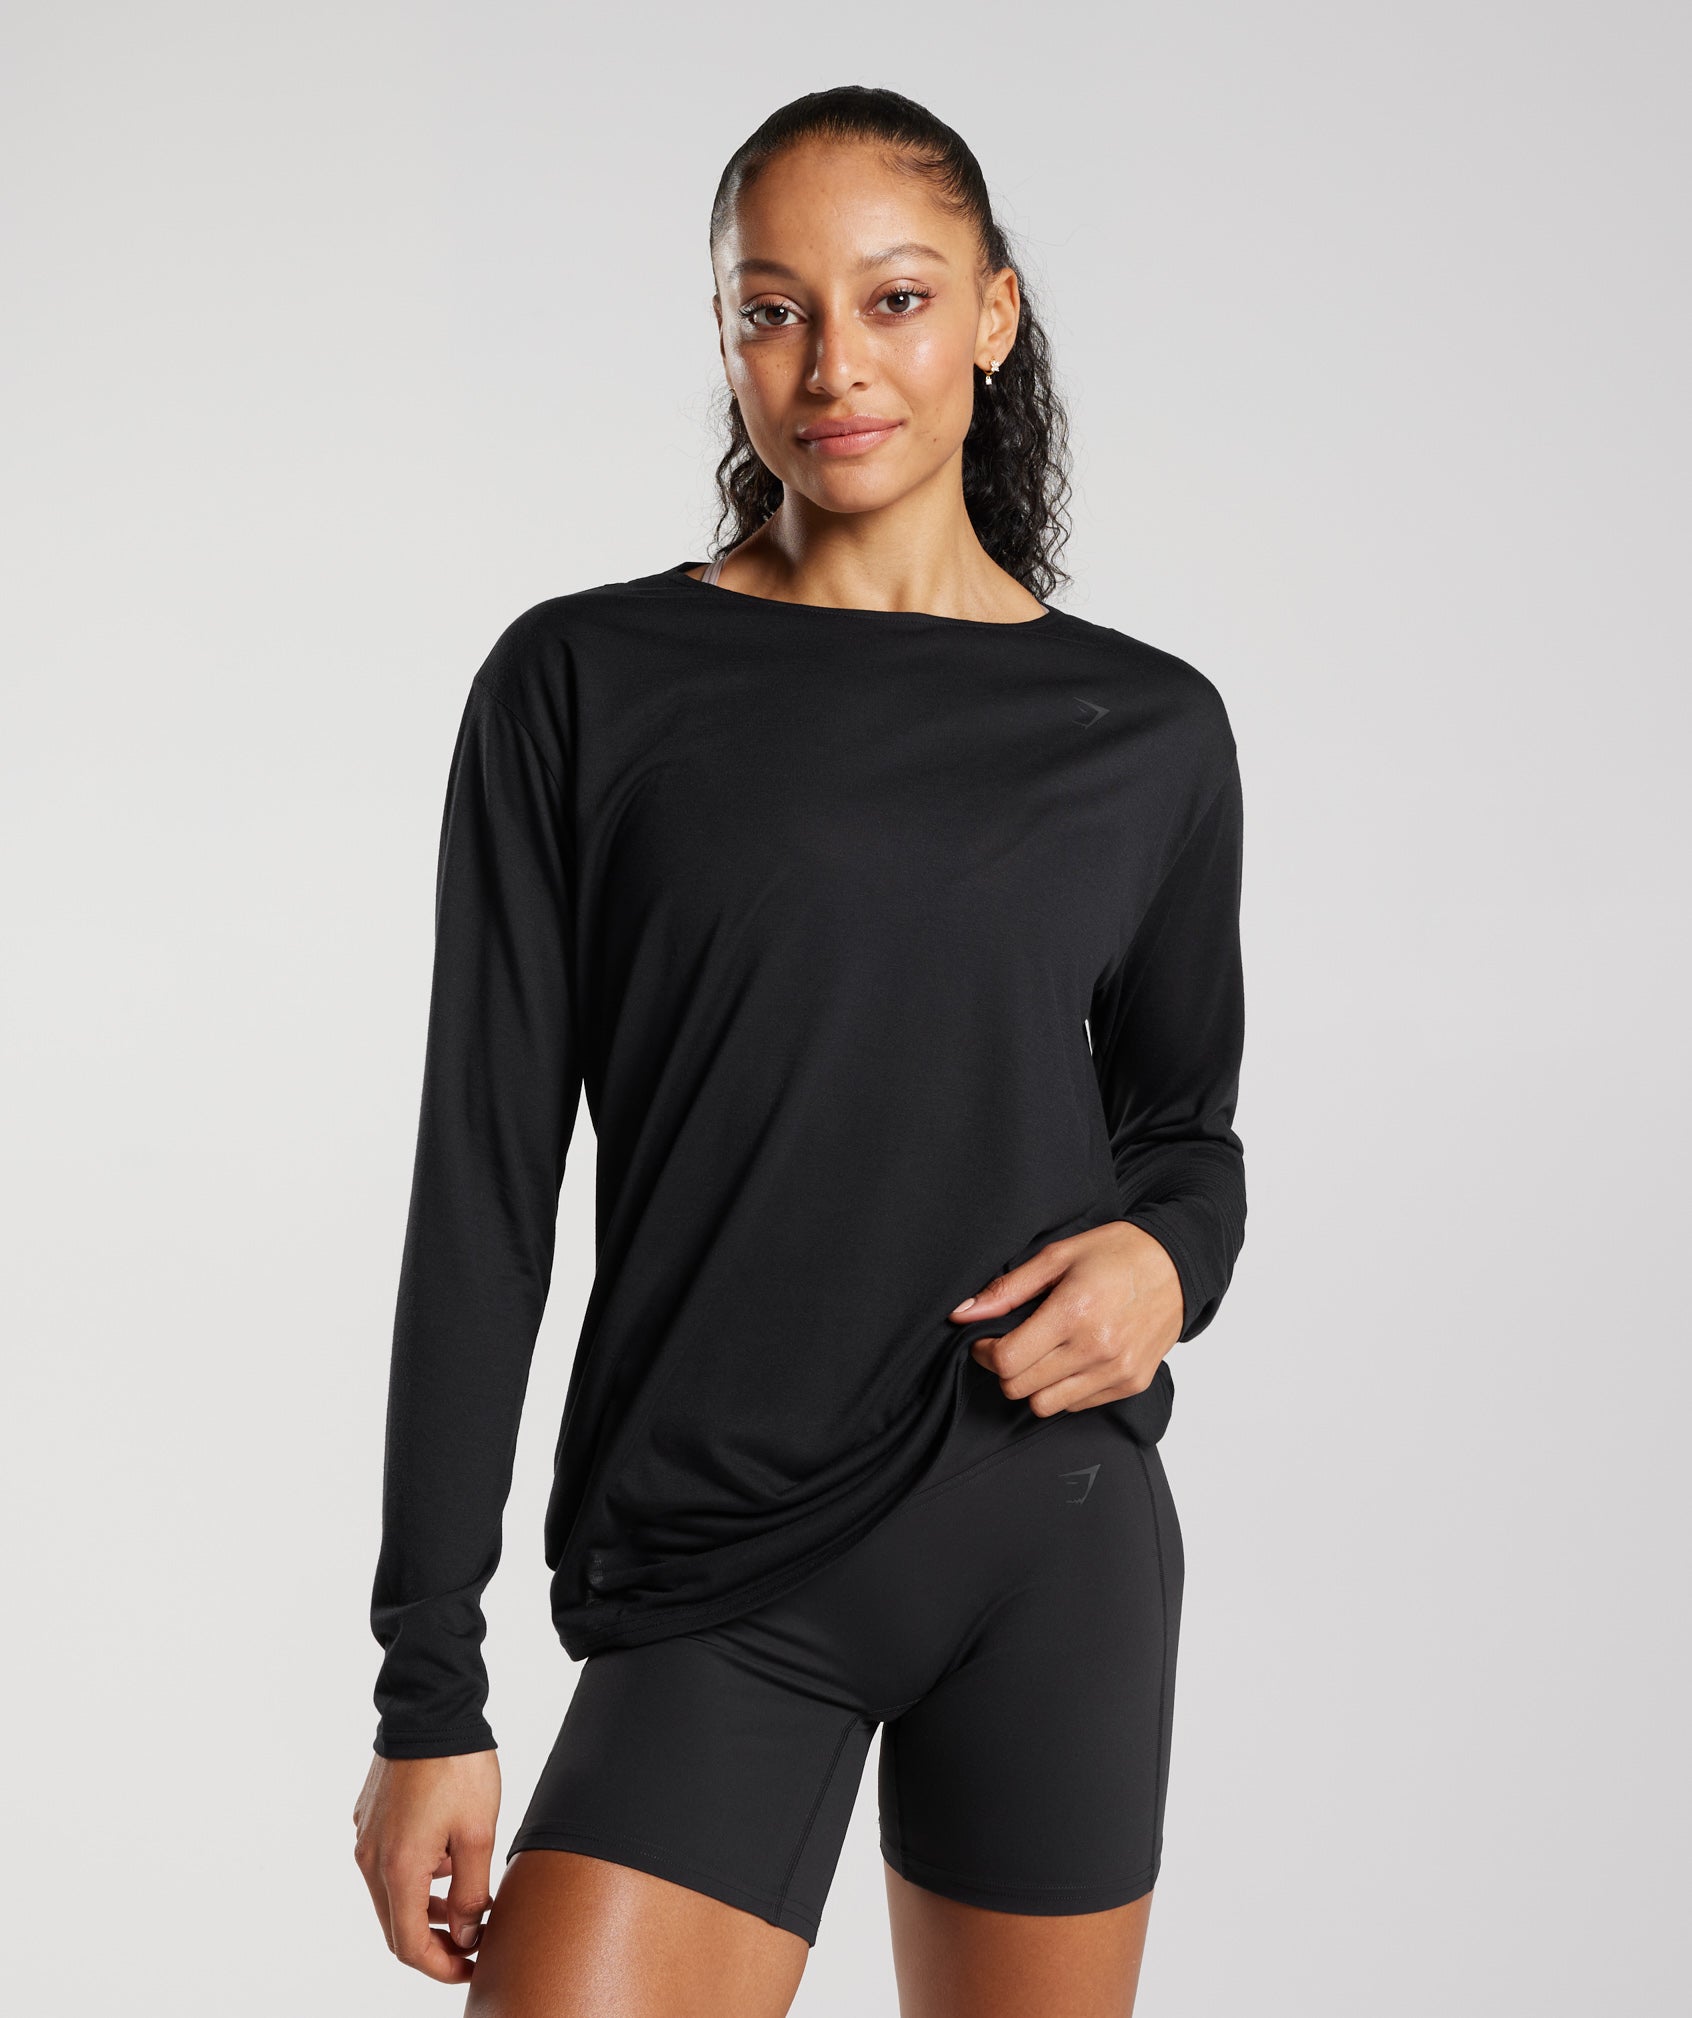 Super Soft Cut-Out Long Sleeve Top in Black - view 1